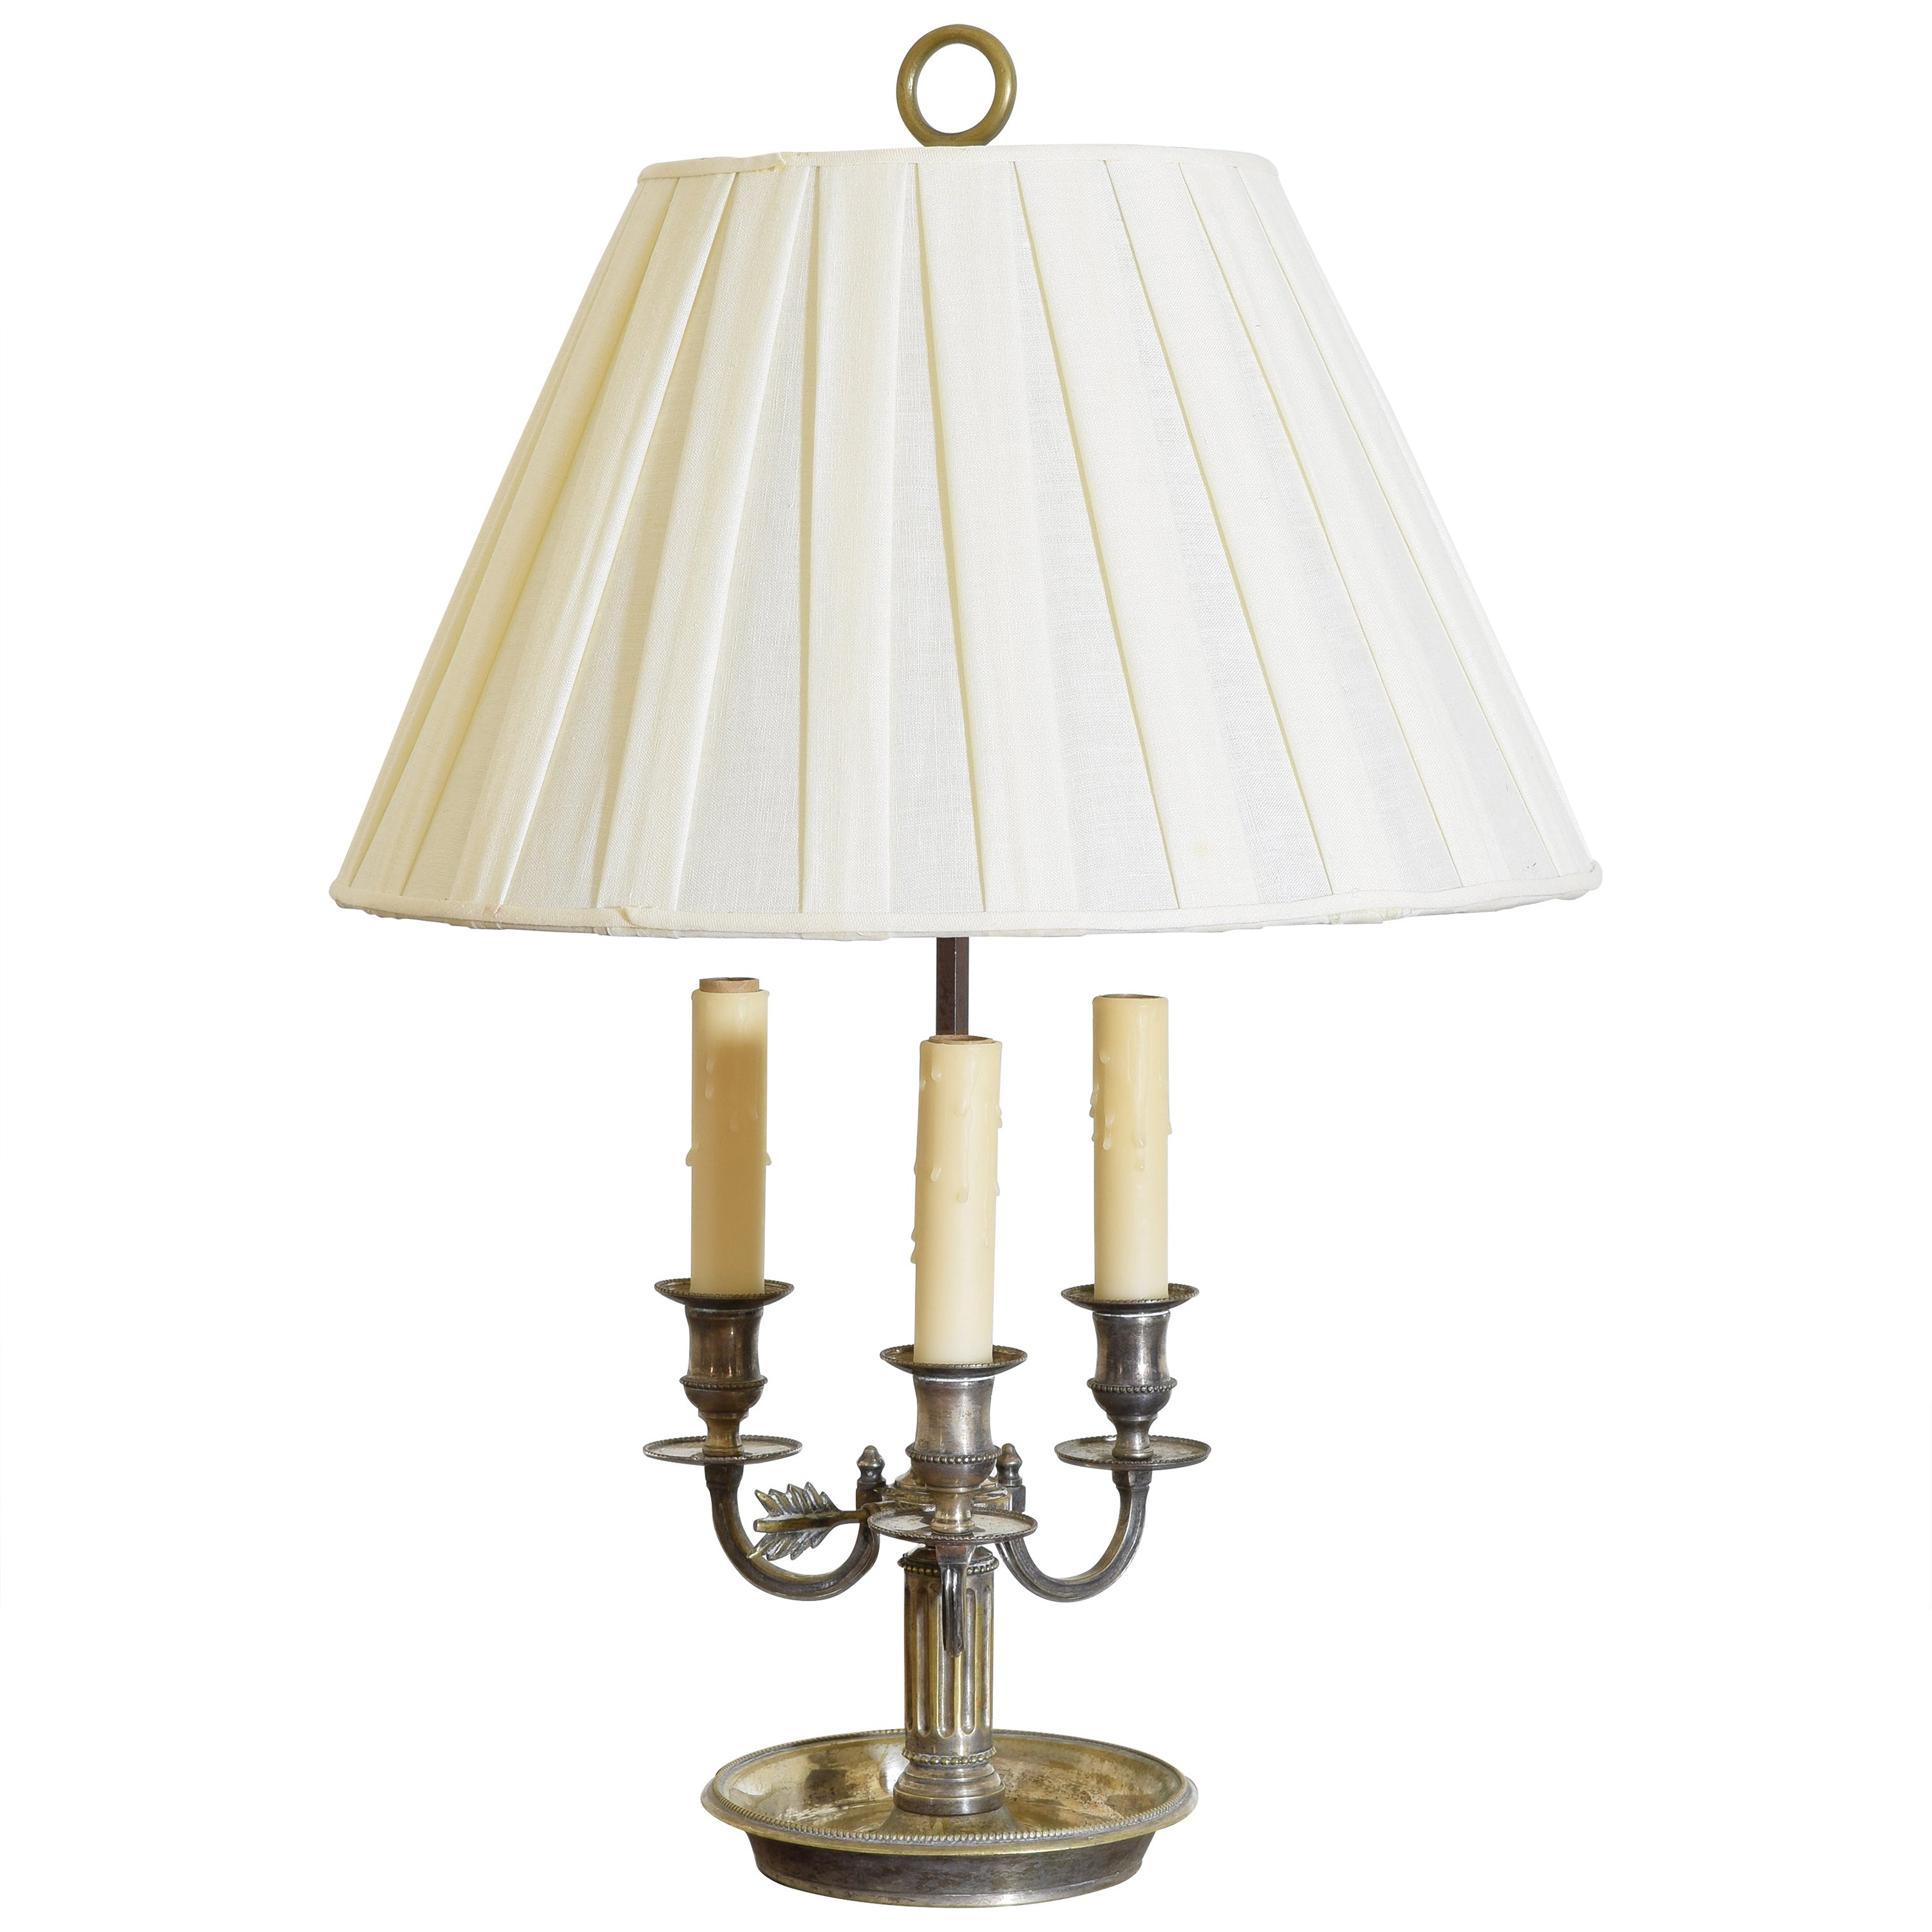 French Neoclassic Silver Plate 3-Light Bouillotte Lamp, 18th/19th cen.